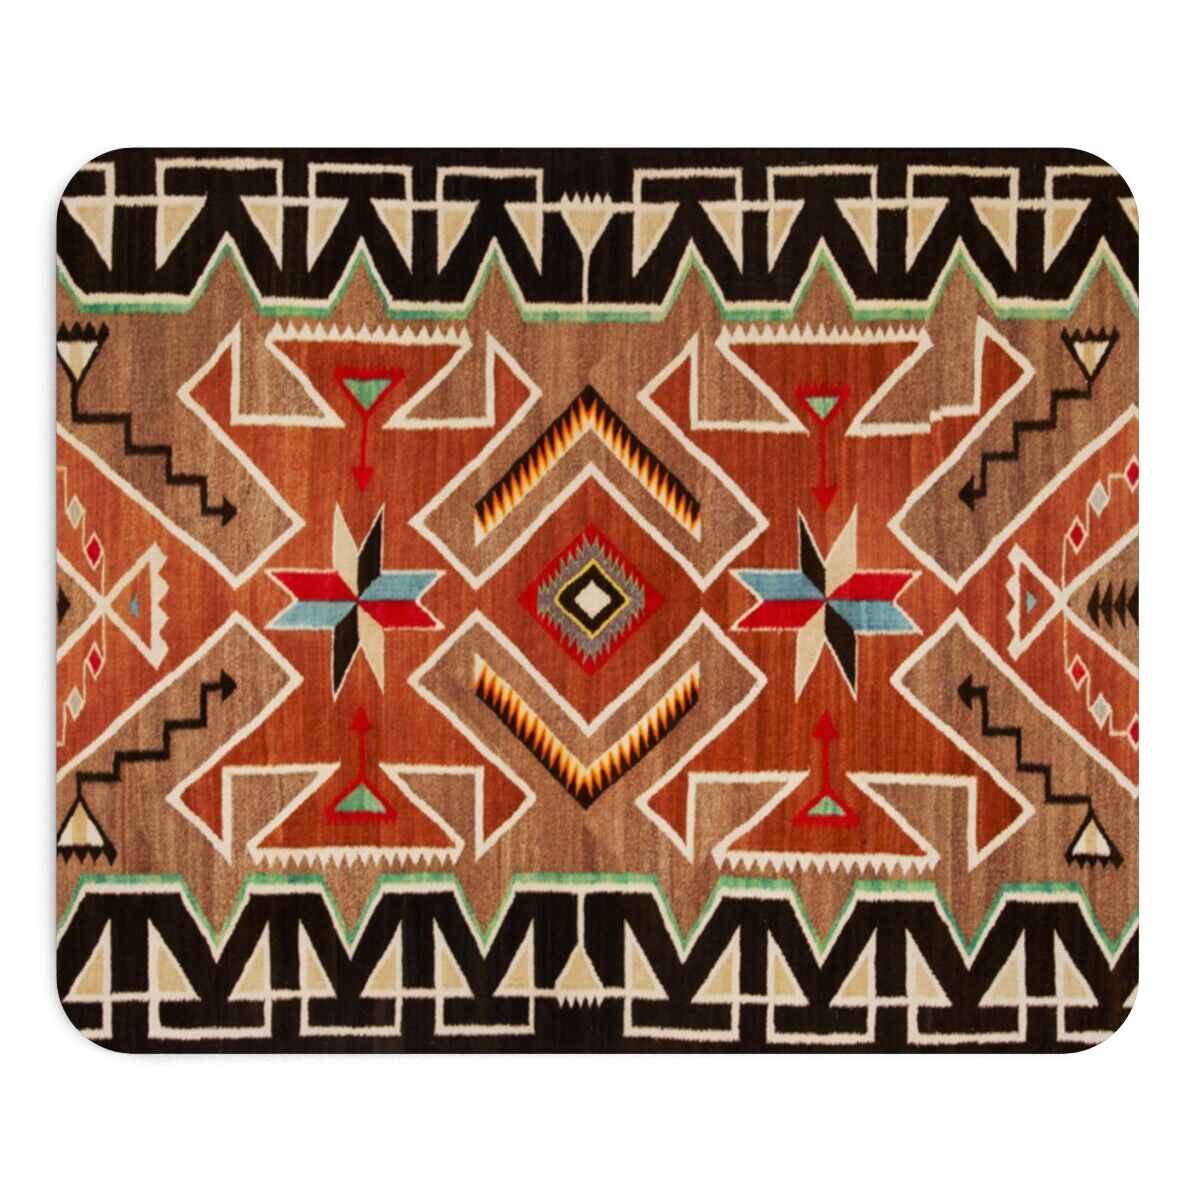 NAVAJO INDIAN Native American Child Blanket from 1915 Mousepad